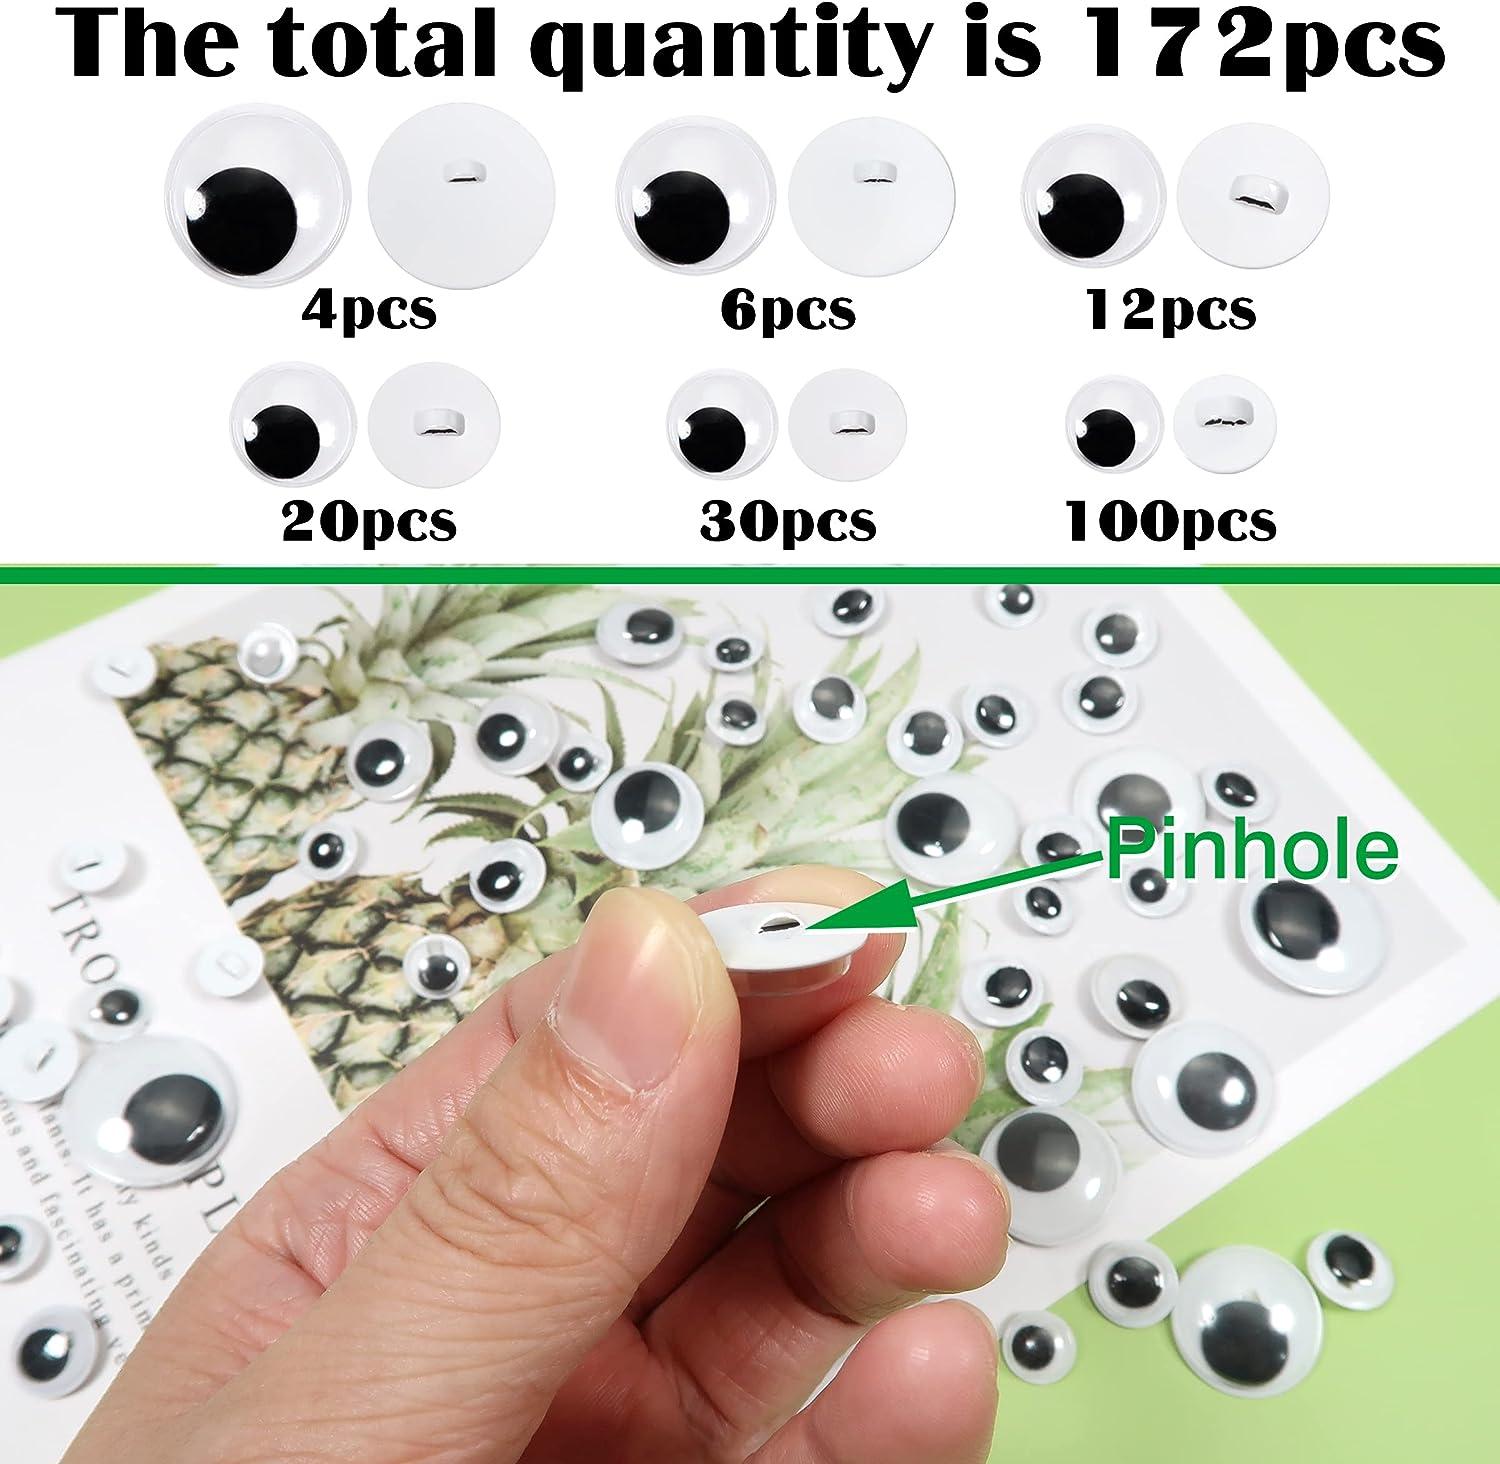 TOAOB 172pcs Sew On Googly Wiggle Eyes Buttons 8mm to 20mm Assorted Sizes  Black Round Plastic Eyes for DIY Stuffed Animals Scrapbooking Sewing Crafts